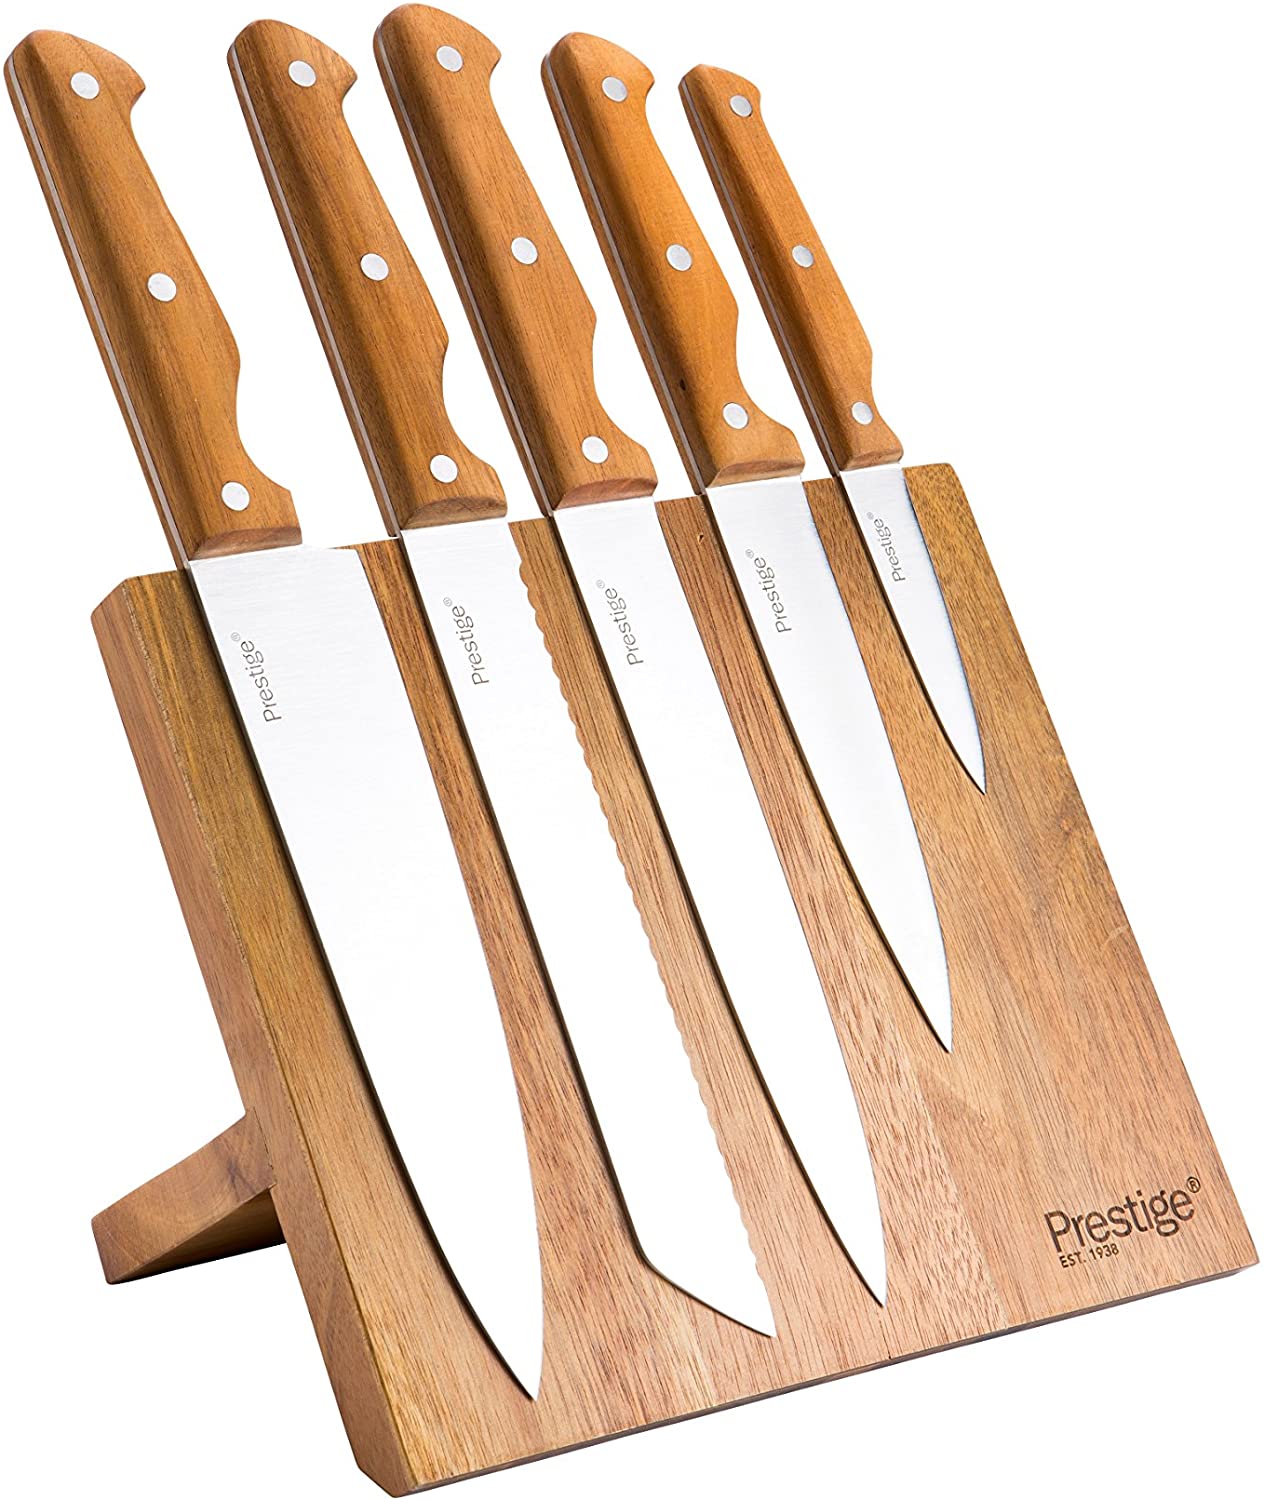 Prestige Stainless Steel and Acacia Wood Magnetic Knife Block, 6 pcs. Moments